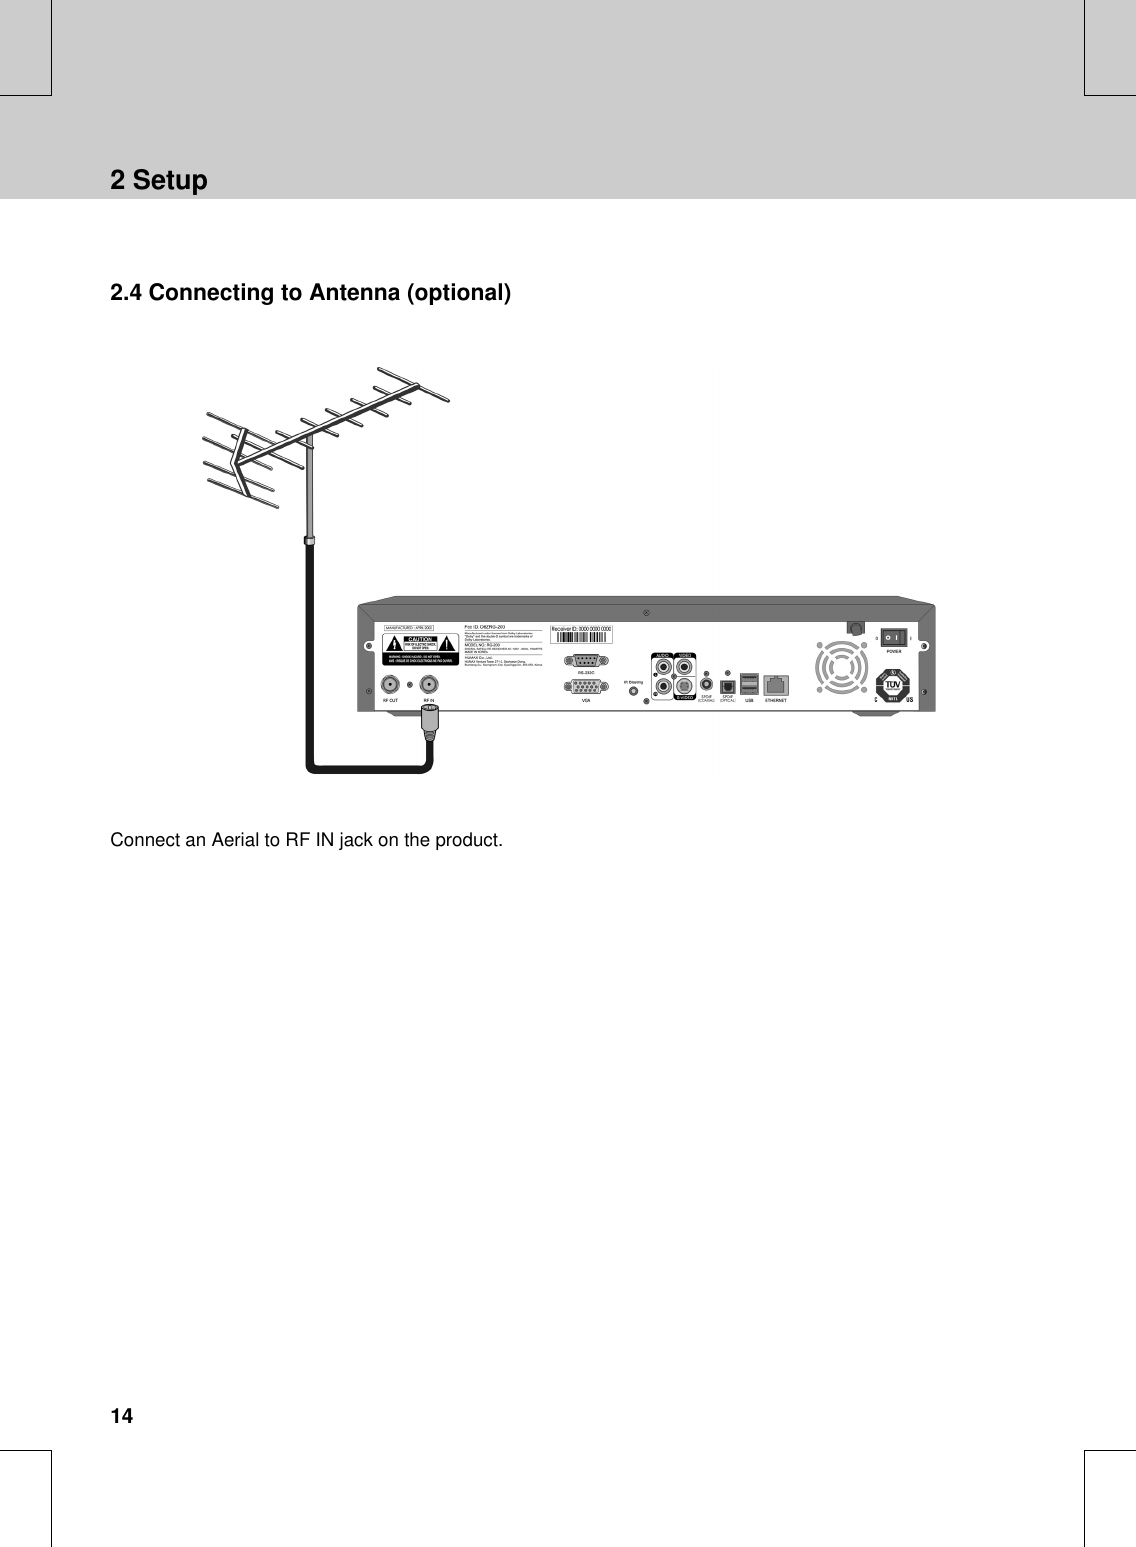 **2.4 Connecting to Antenna (optional)****Connect an Aerial to RF IN jack on the product.**2 Setup14 ****************************